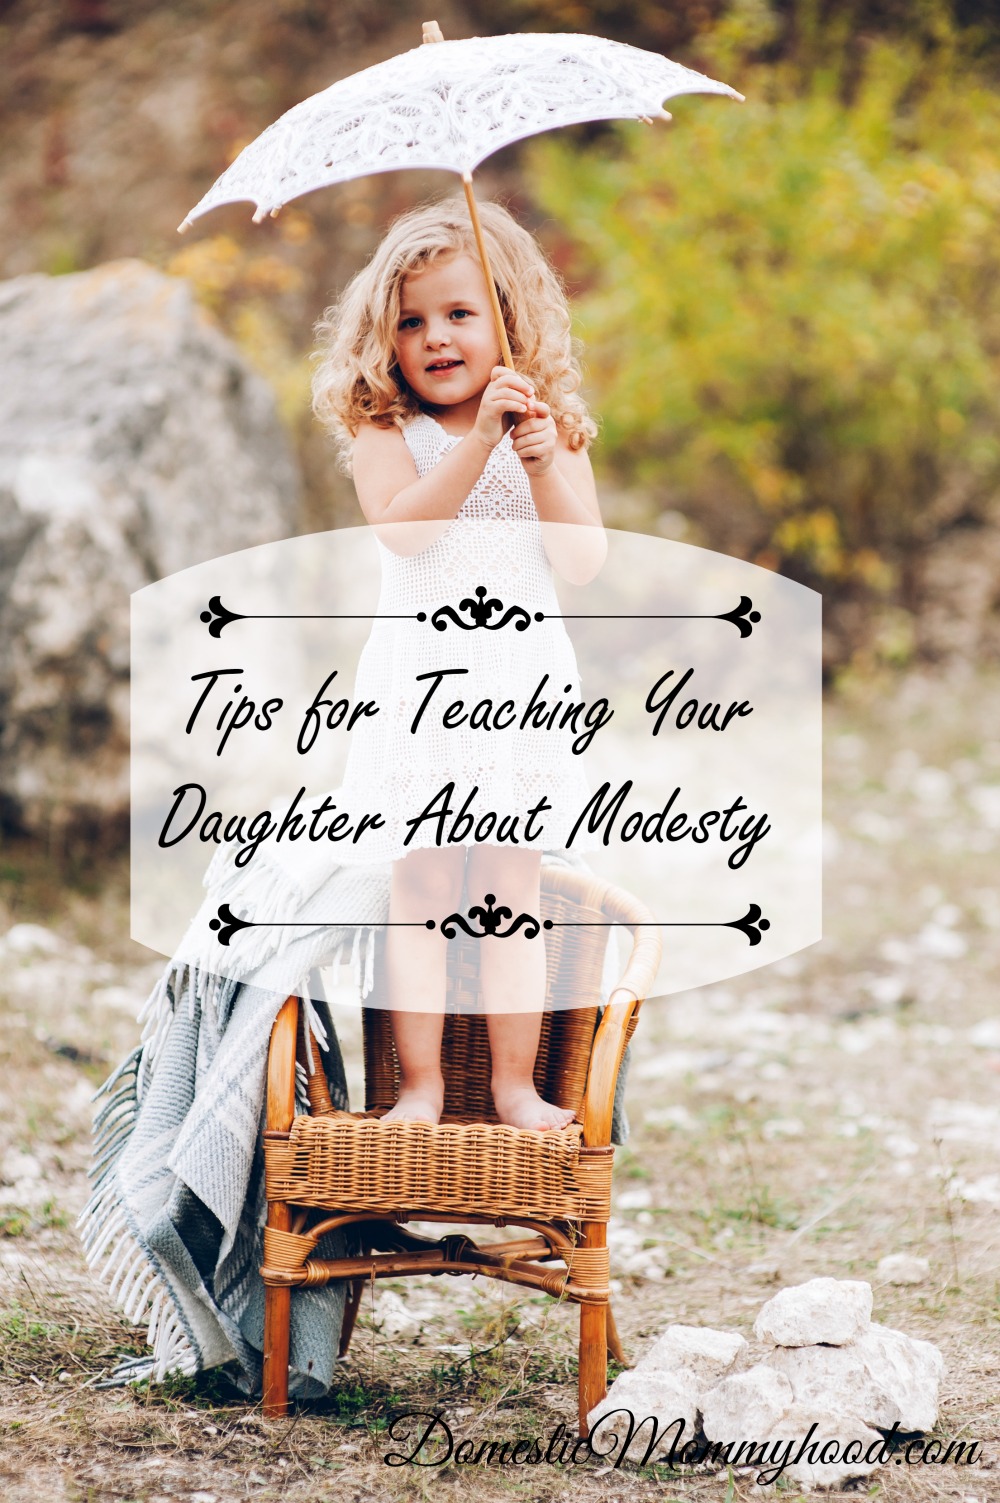 Tips for Teaching Your Daughter about Modesty